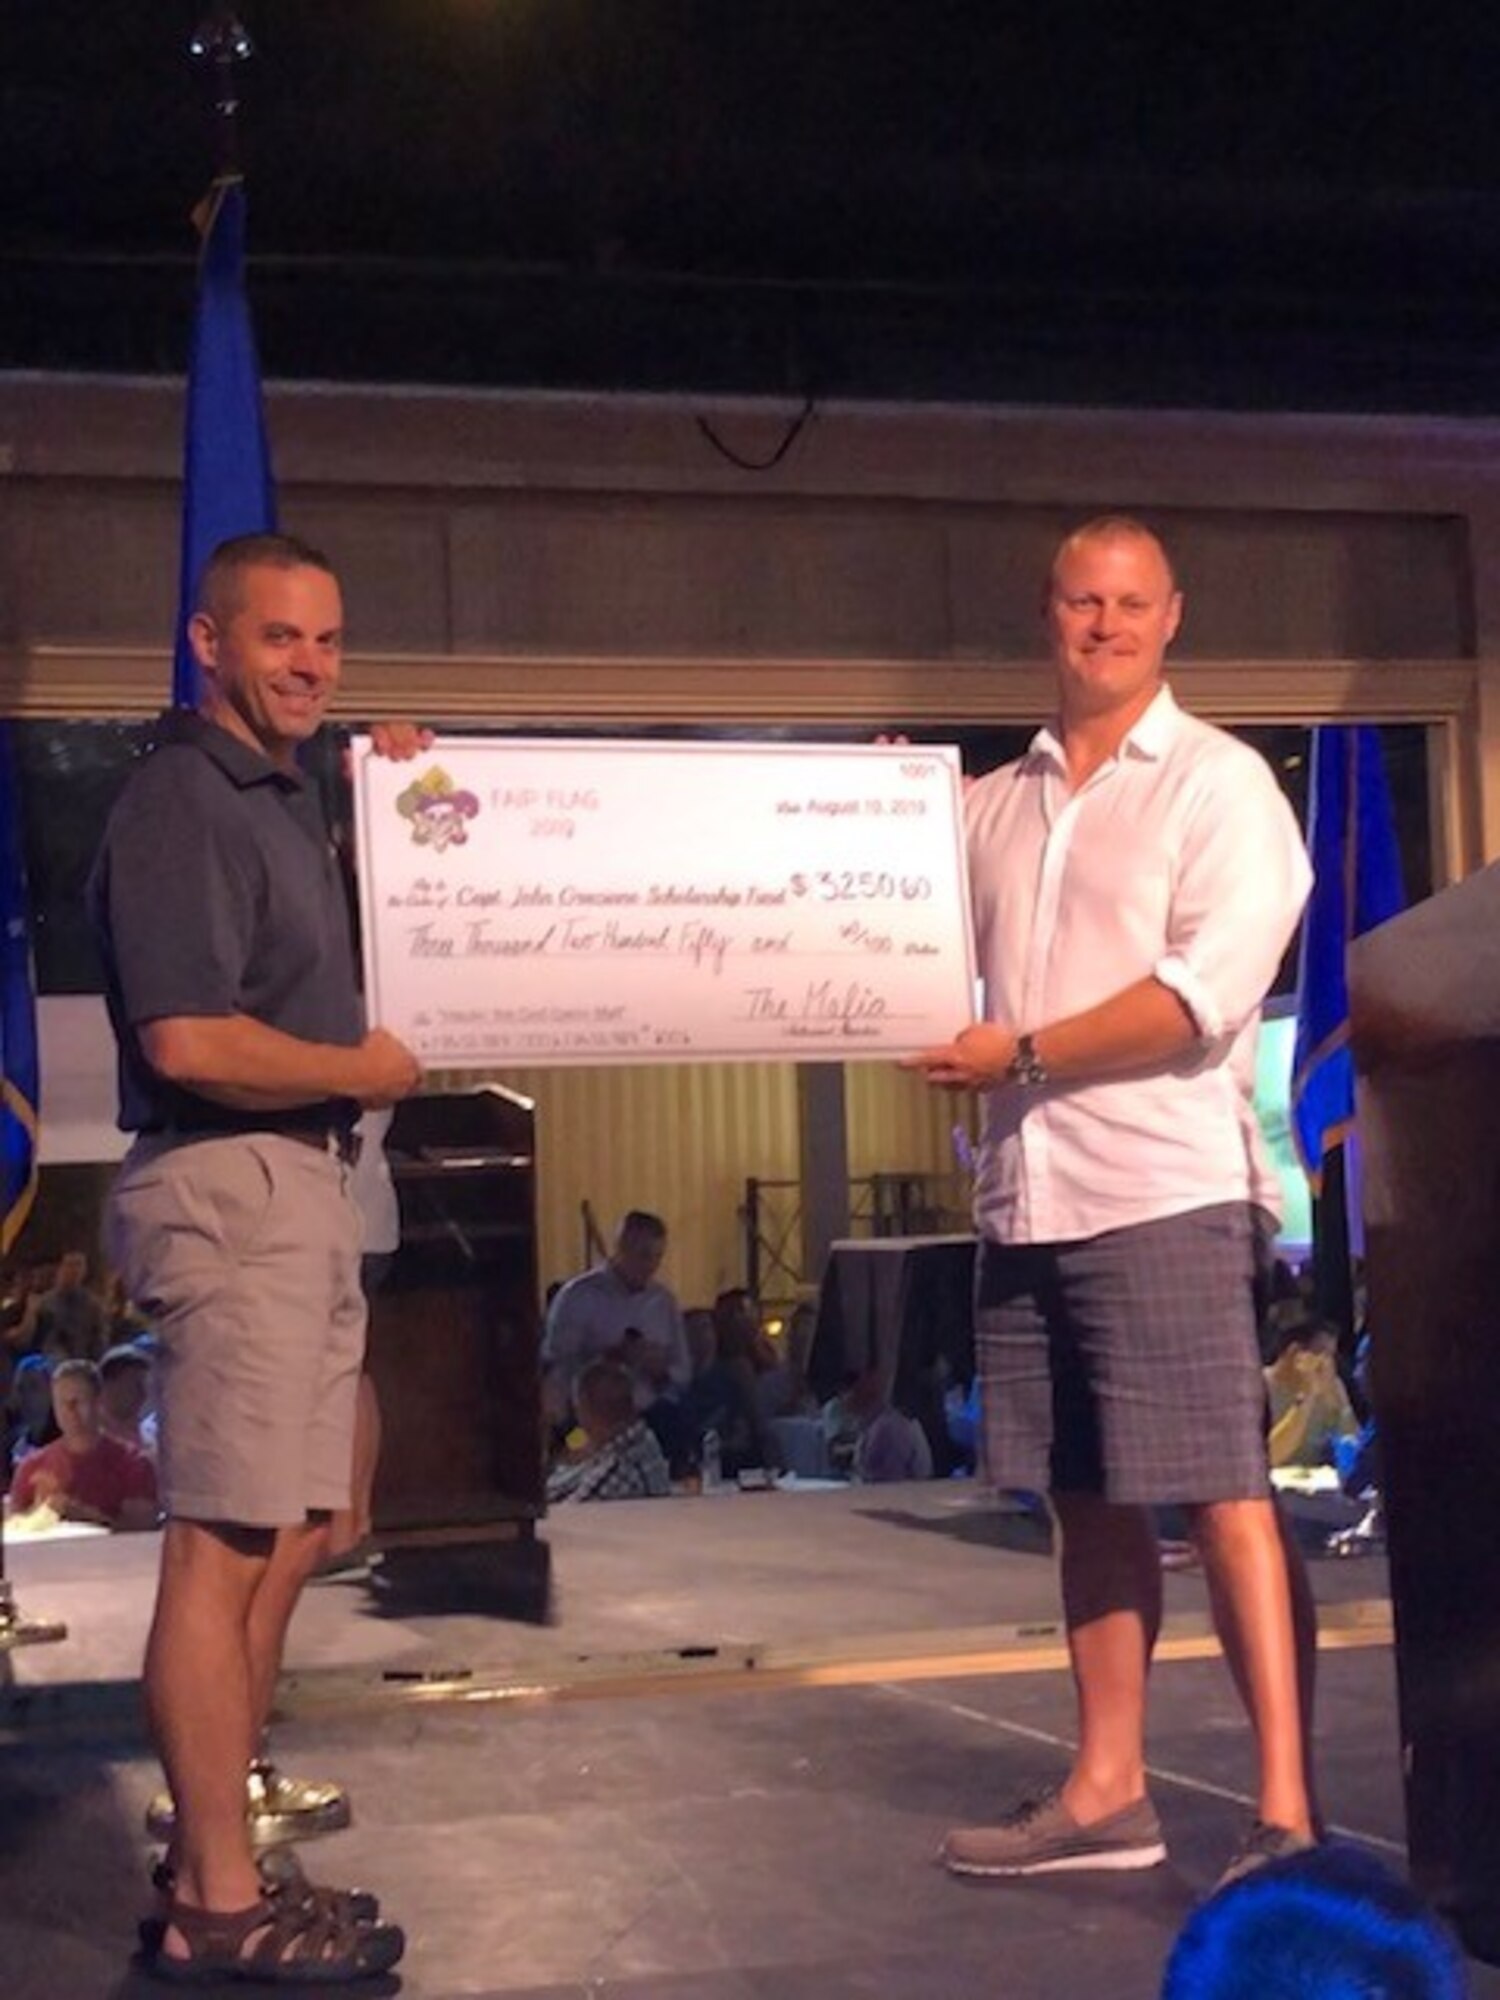 Col. Lee Gentile, 47th Flying Training Wing commander (left) receives a check from Lt. Col. Brent Curtis, 41st Flying Training Squadron commander Aug. 10, 2019, during FAIP Flag on Naval Air Station Fort Worth Joint Reserve Base, New Orleans. At the event, seminars were condcuted to discuss character and what it means to be an excellent instructor. (U.S. Air Force photo by 1st Lt. Patricia Pasque)